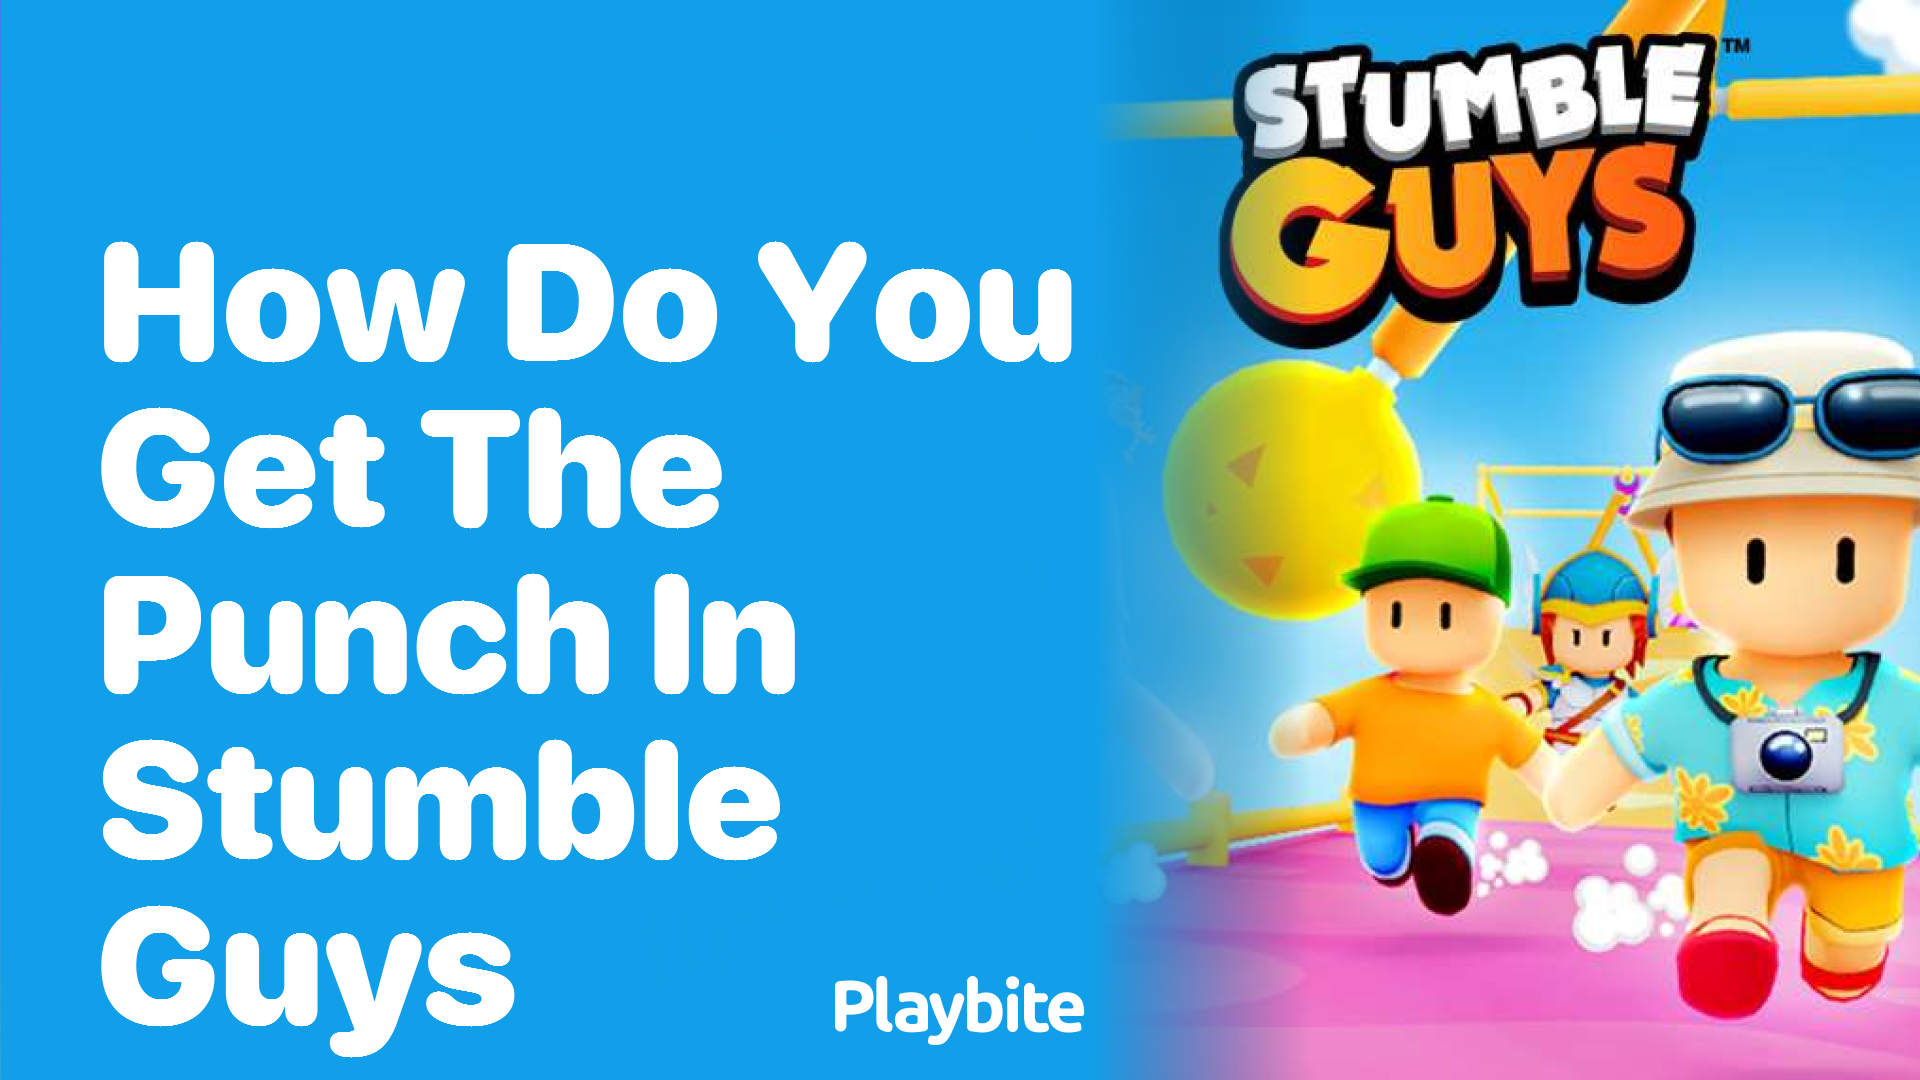 How Do You Get the Punch in Stumble Guys?